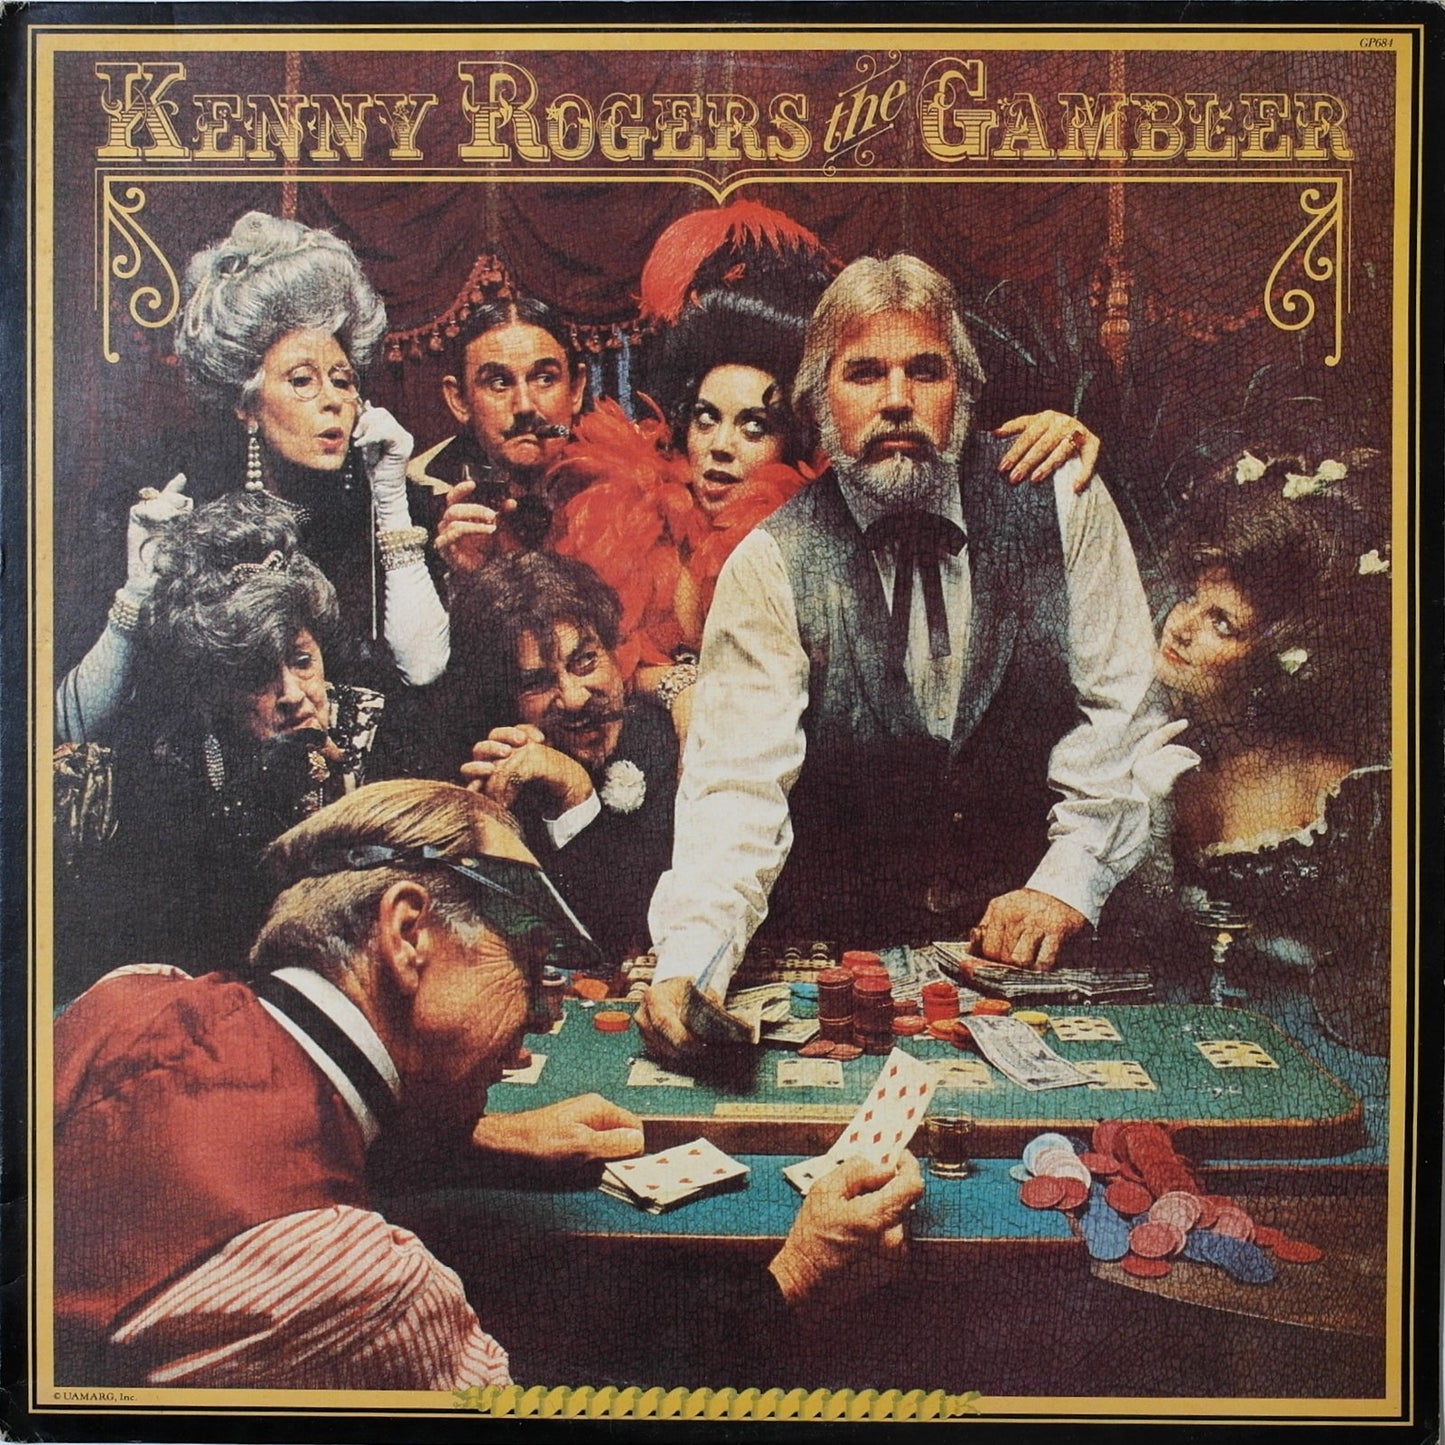 KENNY ROGERS - The Gambler